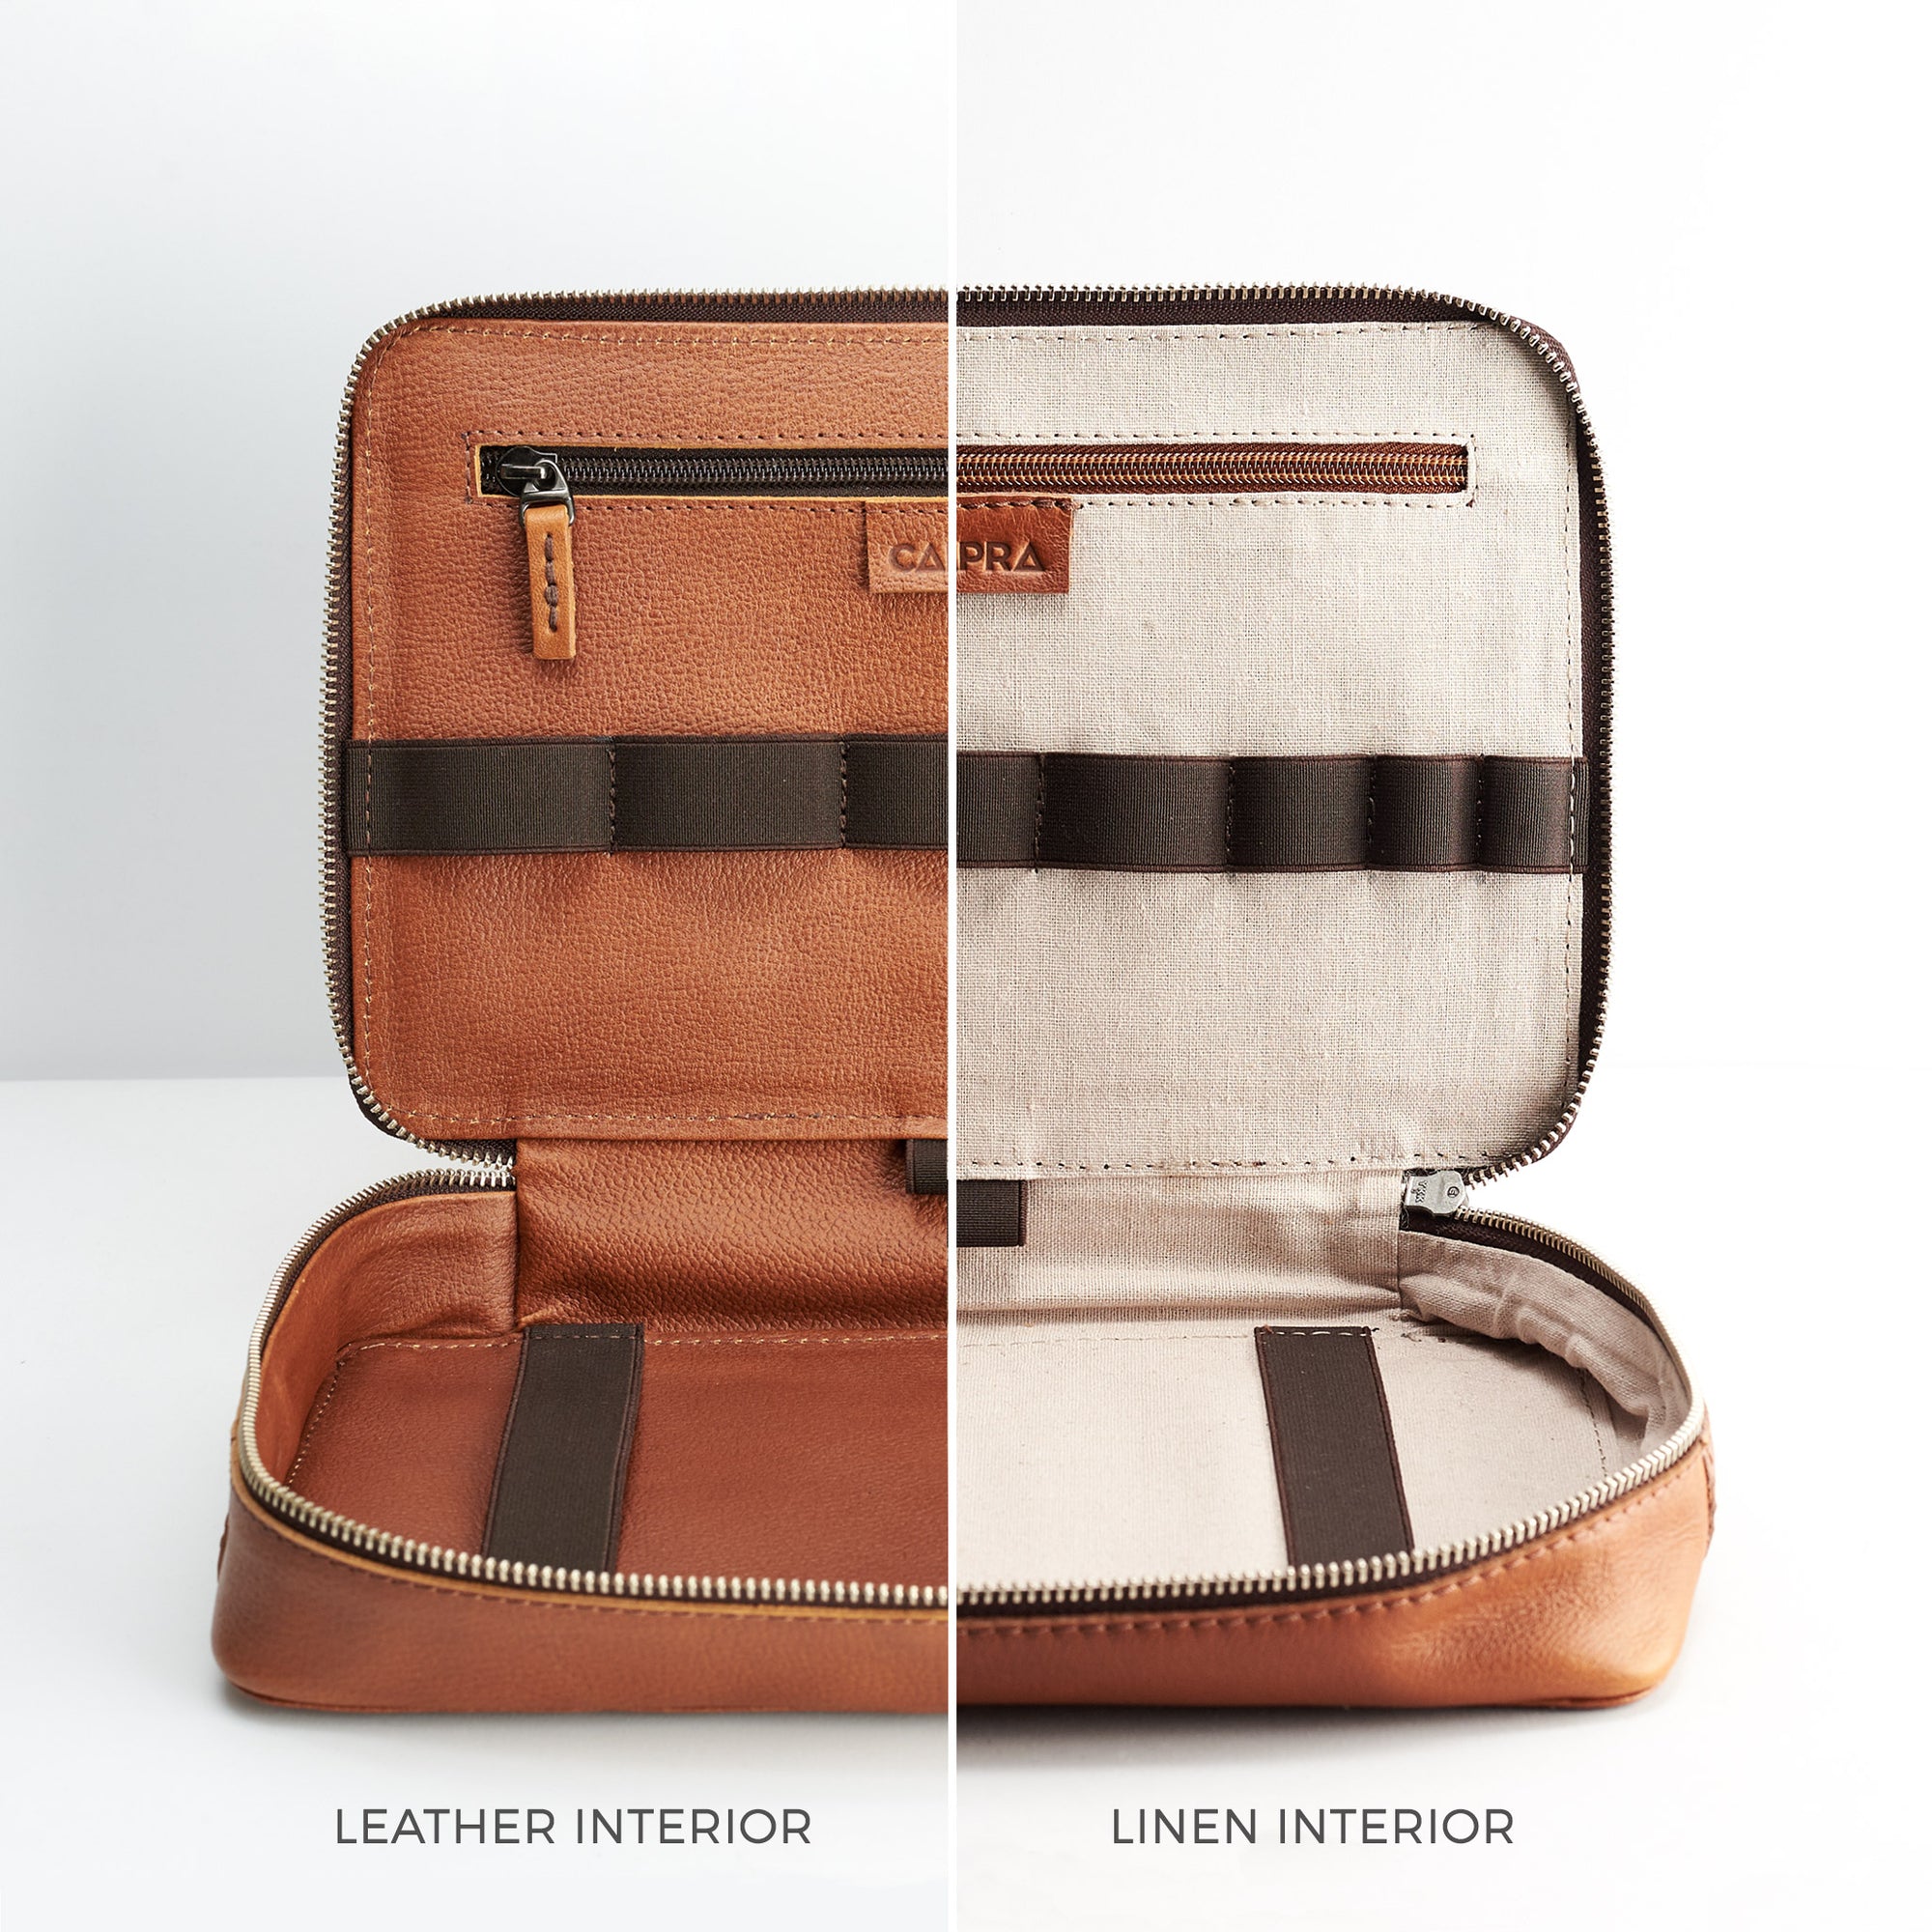 Leather or linen interior. Tan gadget bag for travel by Capra Leather